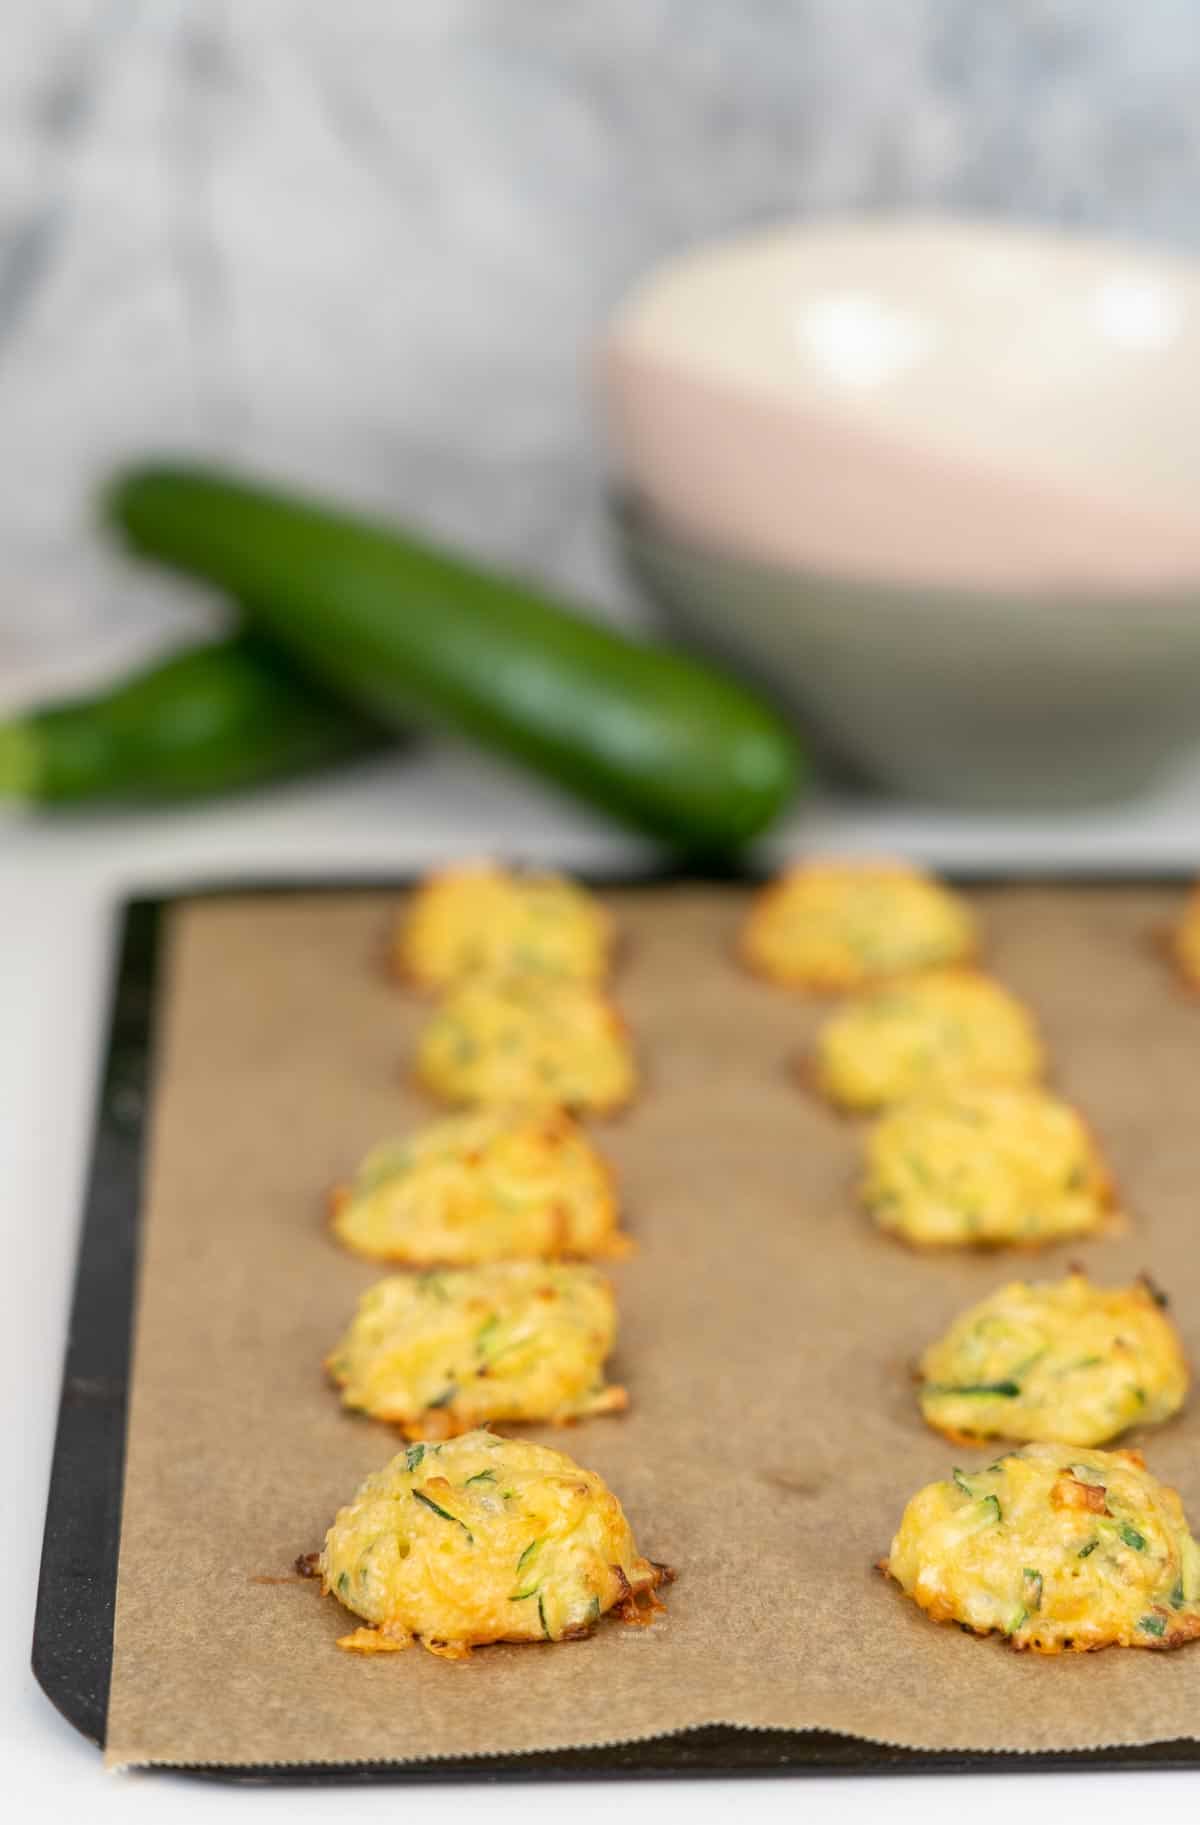 Zucchini tots on a lined baking tray with zucchini and coloured bowls in the background.